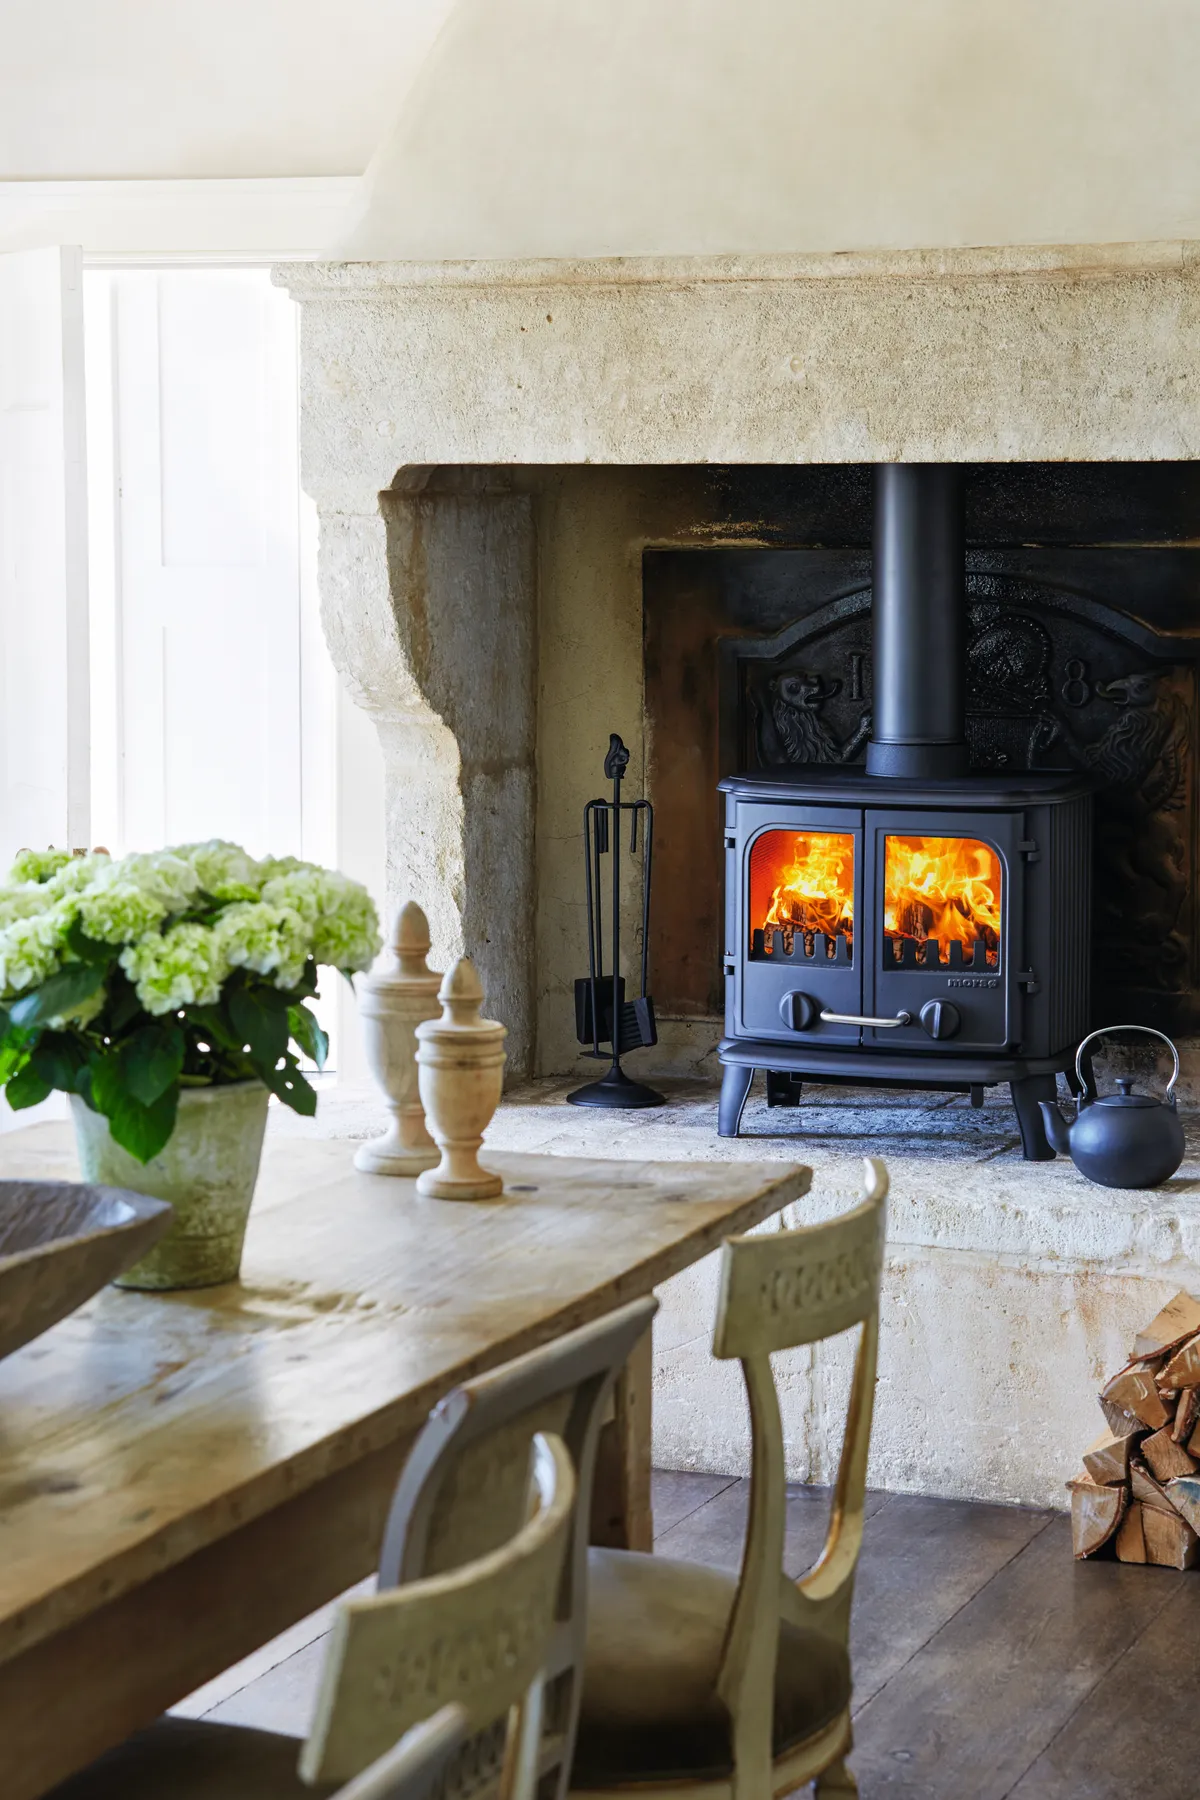 Panther 2110 cleanheat cast-iron multi-fuel stove